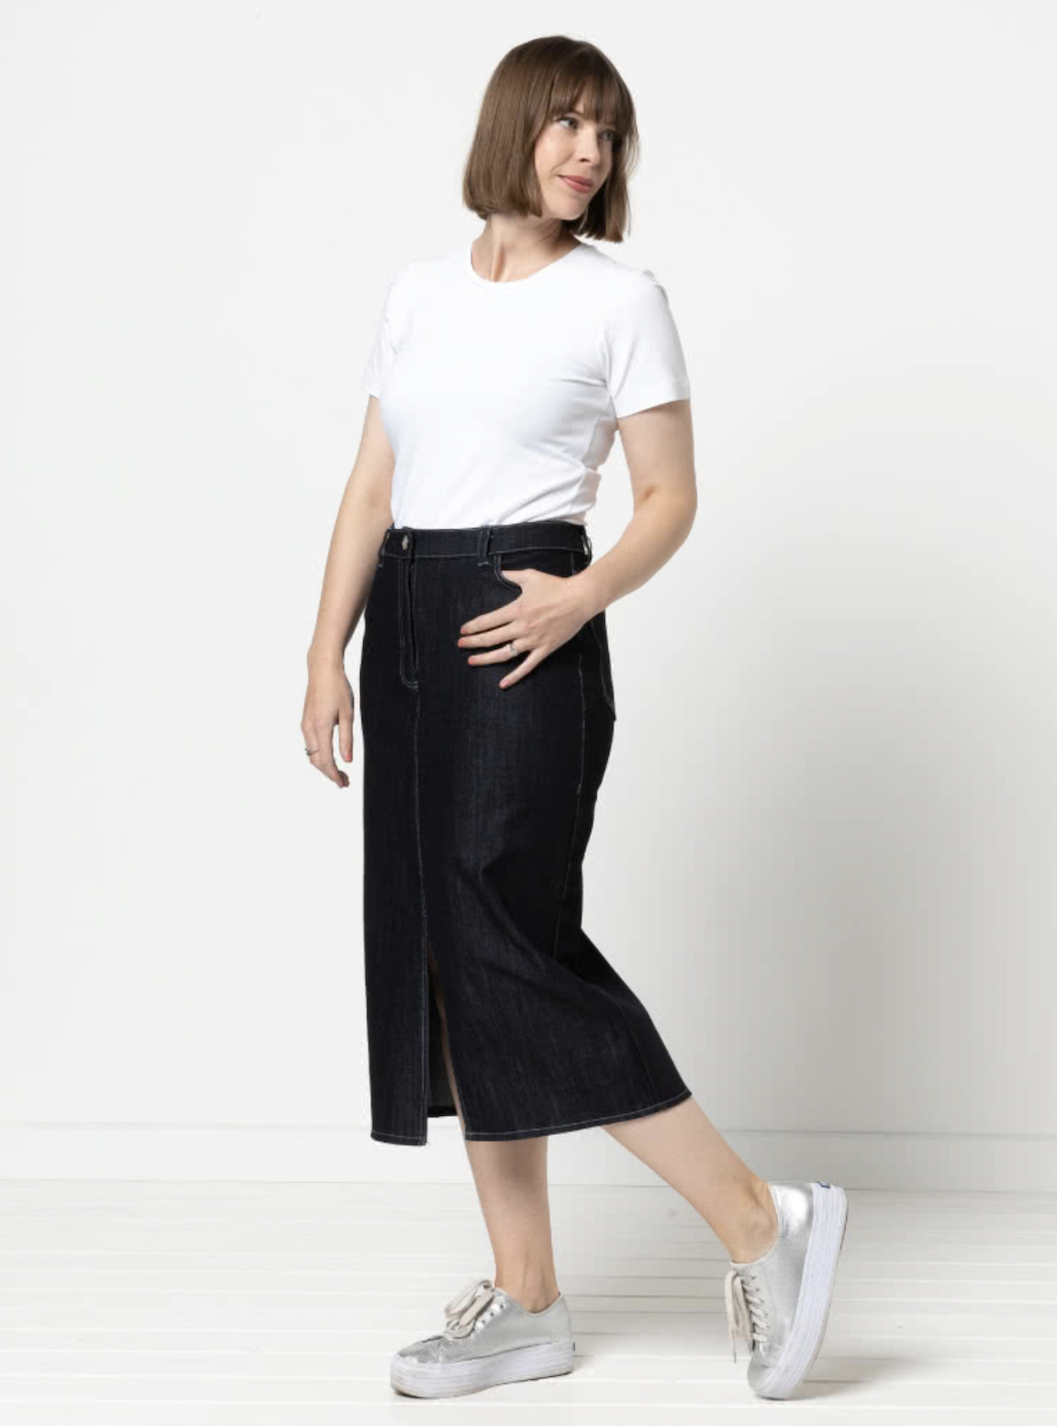 Style Arc Tommie Jeans Skirt - The Fold Line